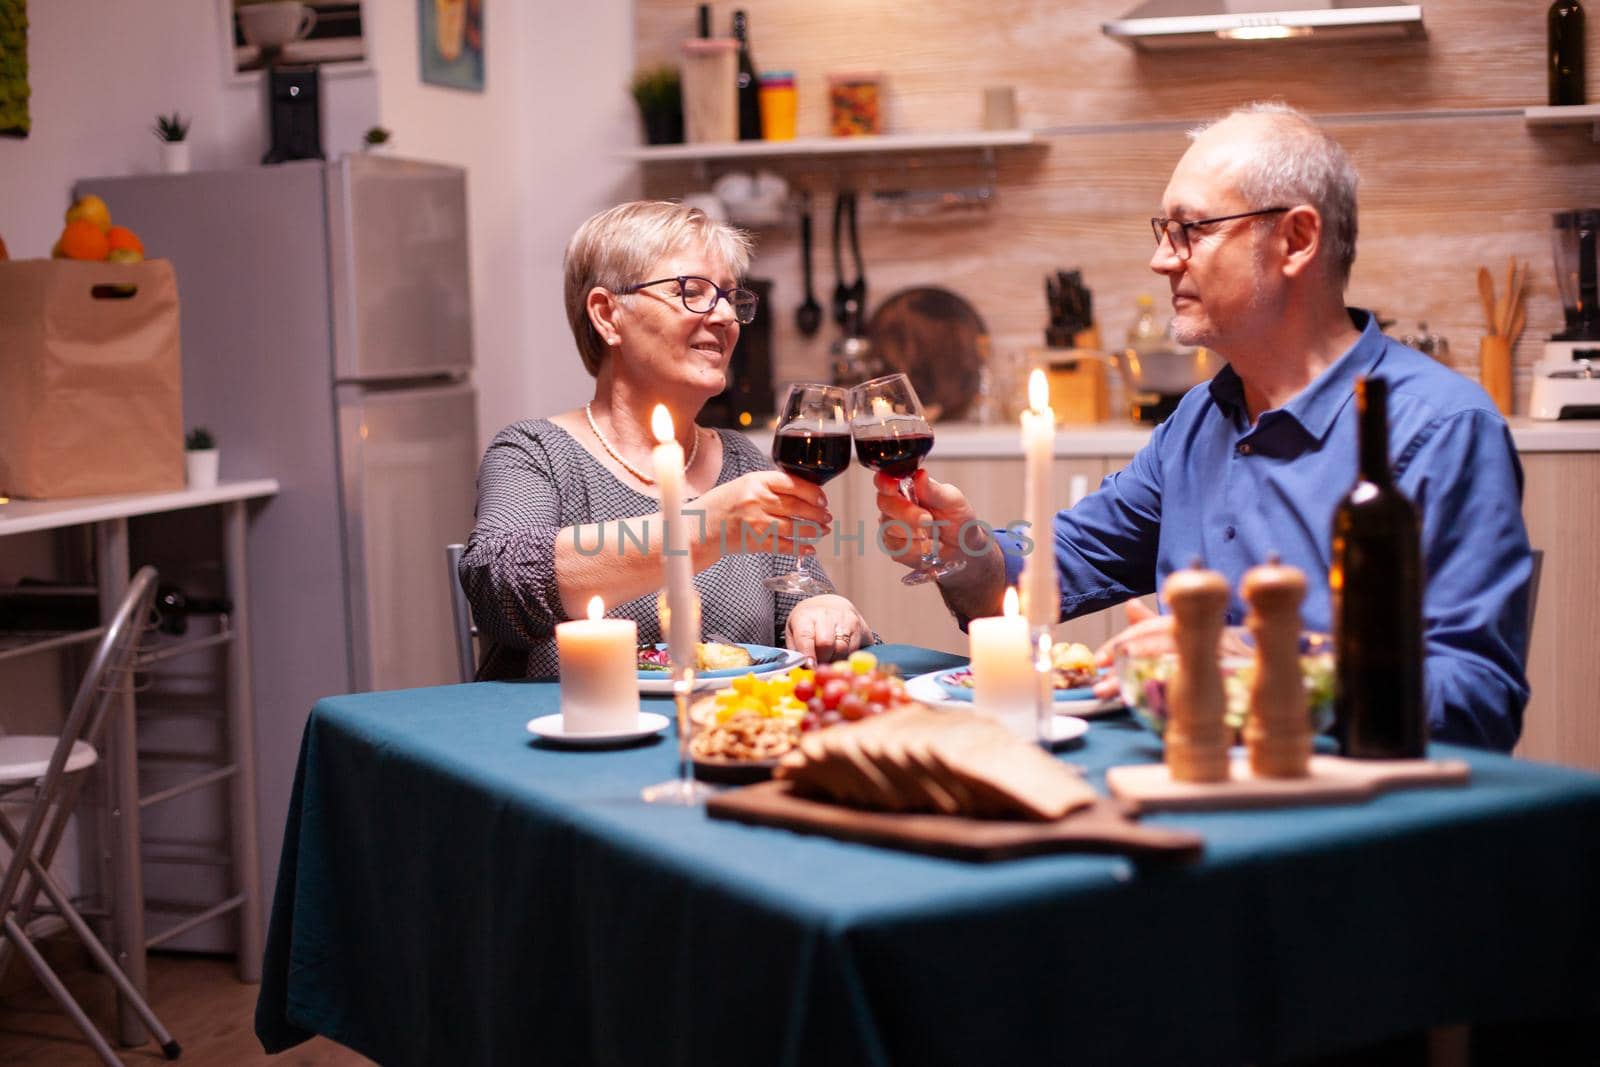 Candles burning on kitchen table and old couple toasting with glasses for red wine for their relationship. Happy cheerful senior elderly couple dining together in the cozy kitchen, enjoying the meal.